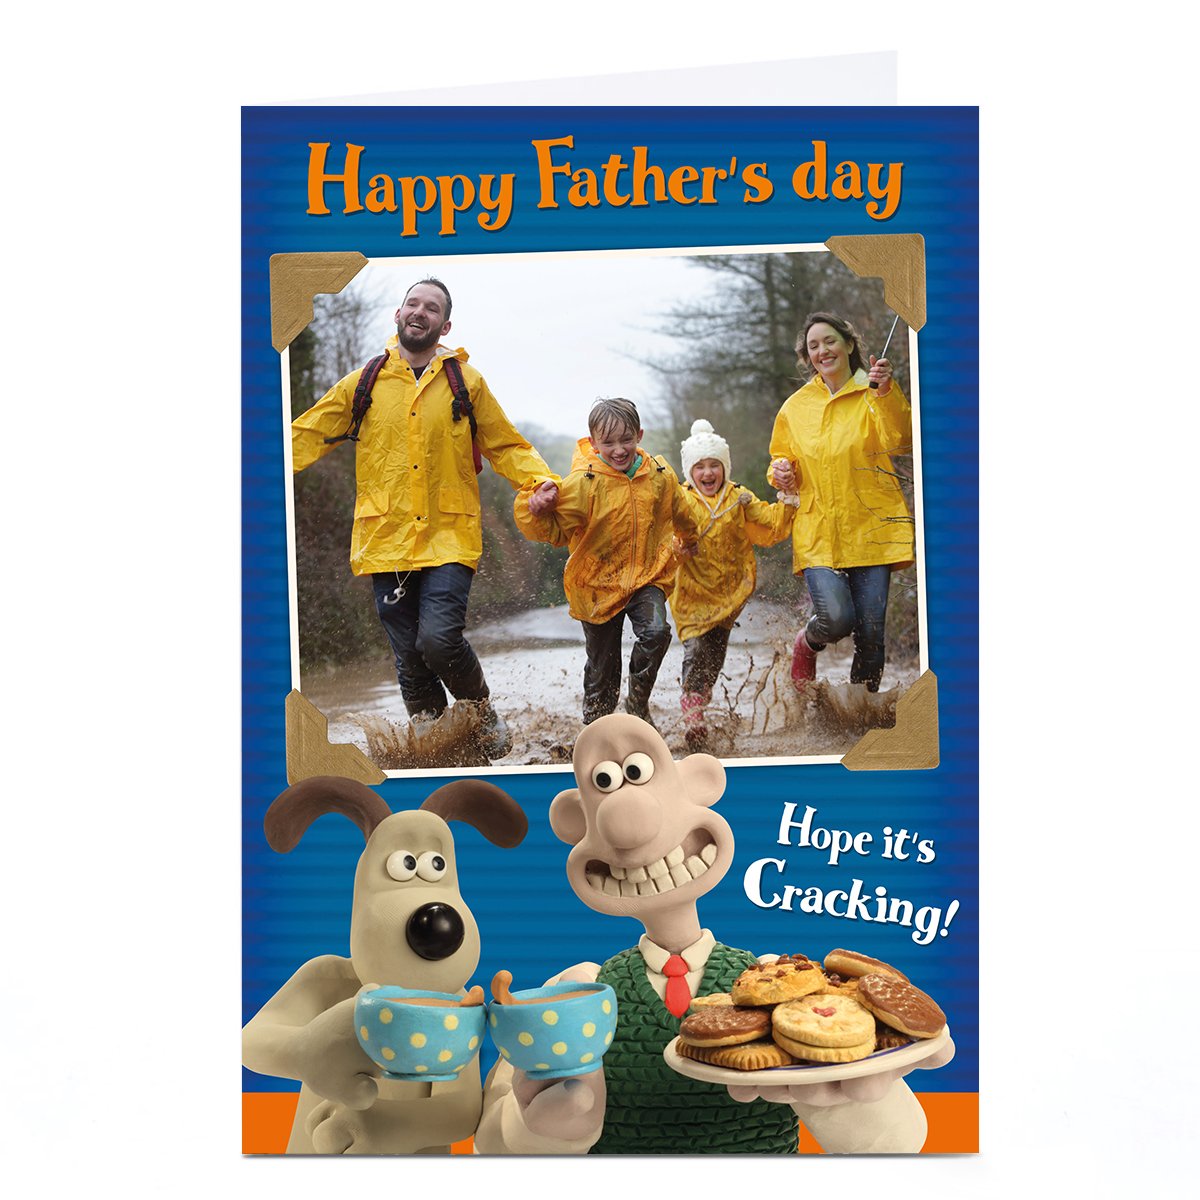 Photo Wallace & Gromit Father's Day Card - Hope it's Cracking!